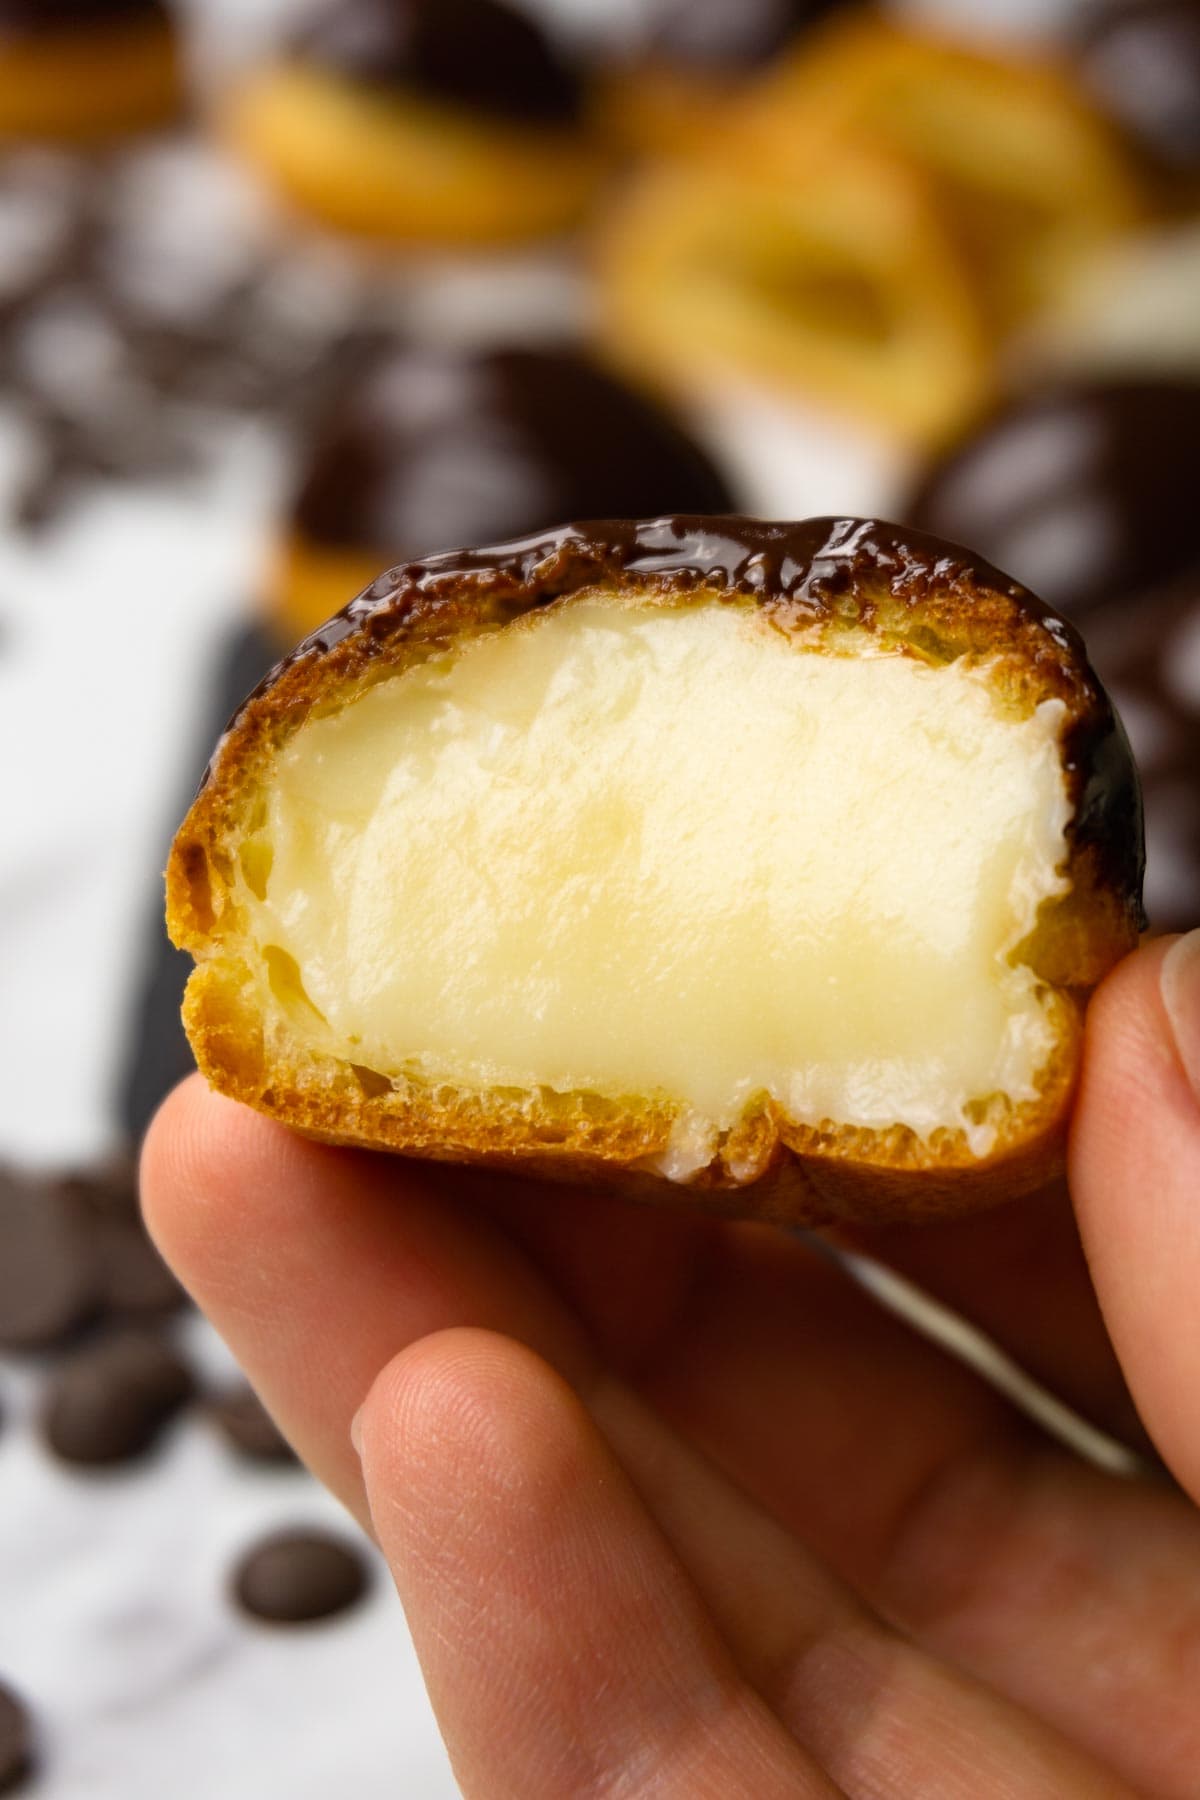 A hand is holding a profiterole filled with pastry cream and glazed with chocolate ganache, one bite is taken.